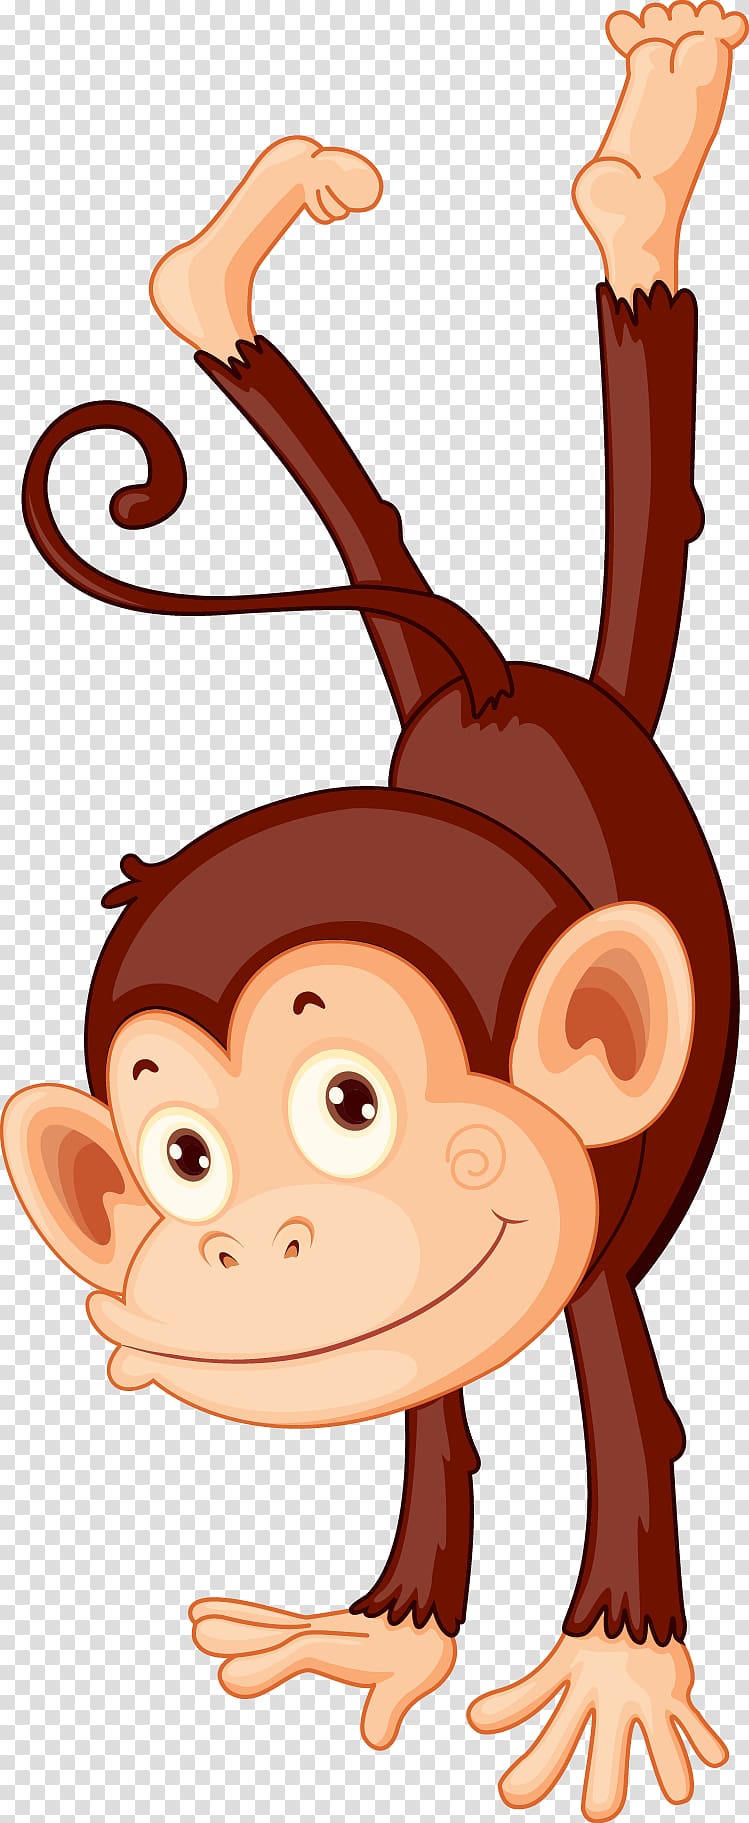 Baboons Monkey Crab-eating macaque Illustration, Hand-painted monkey transparent background PNG clipart